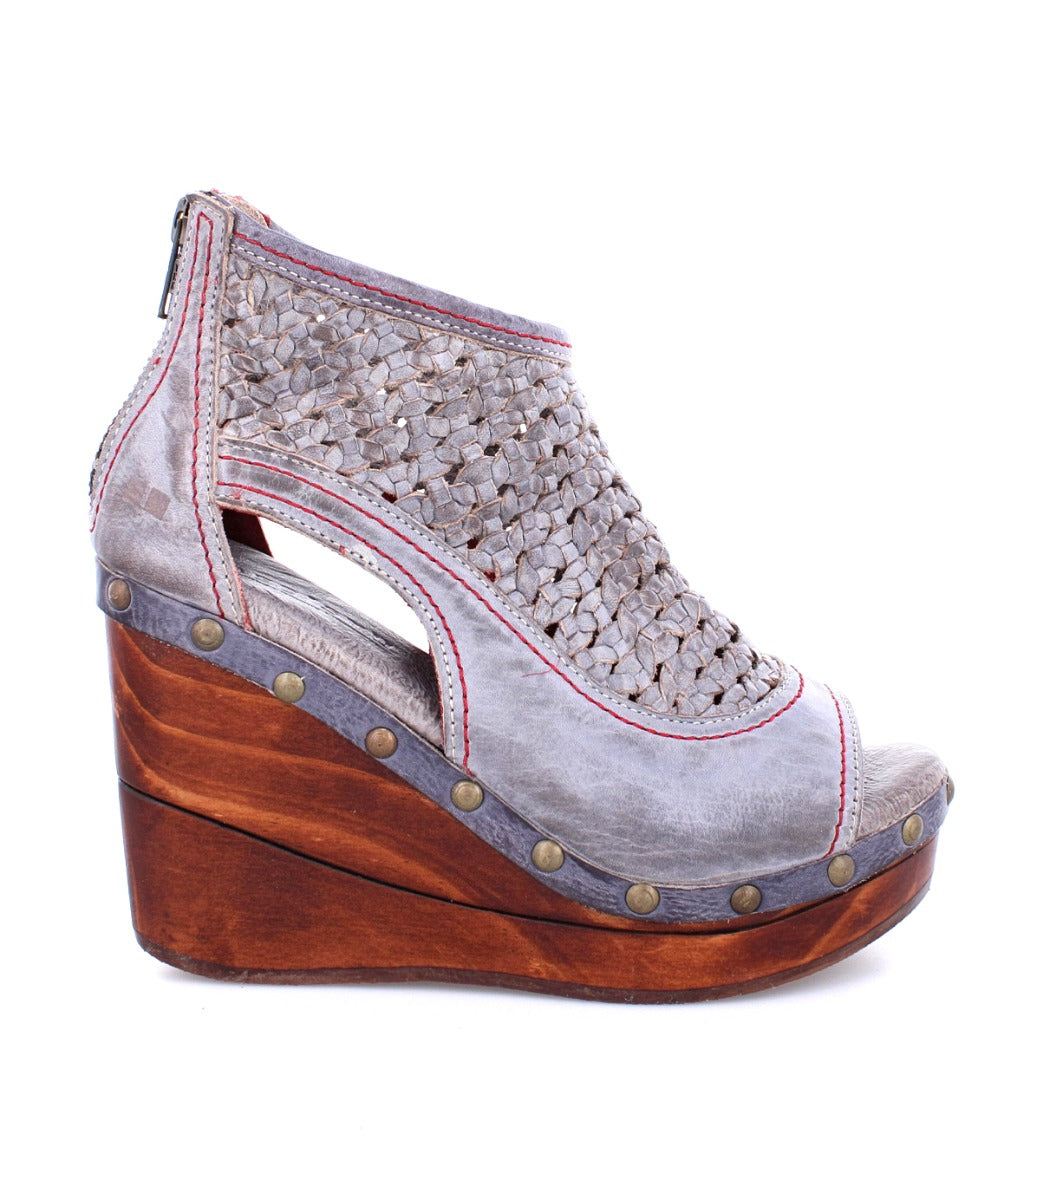 An Odette by Bed Stu women's grey wedge sandal with a wooden platform.